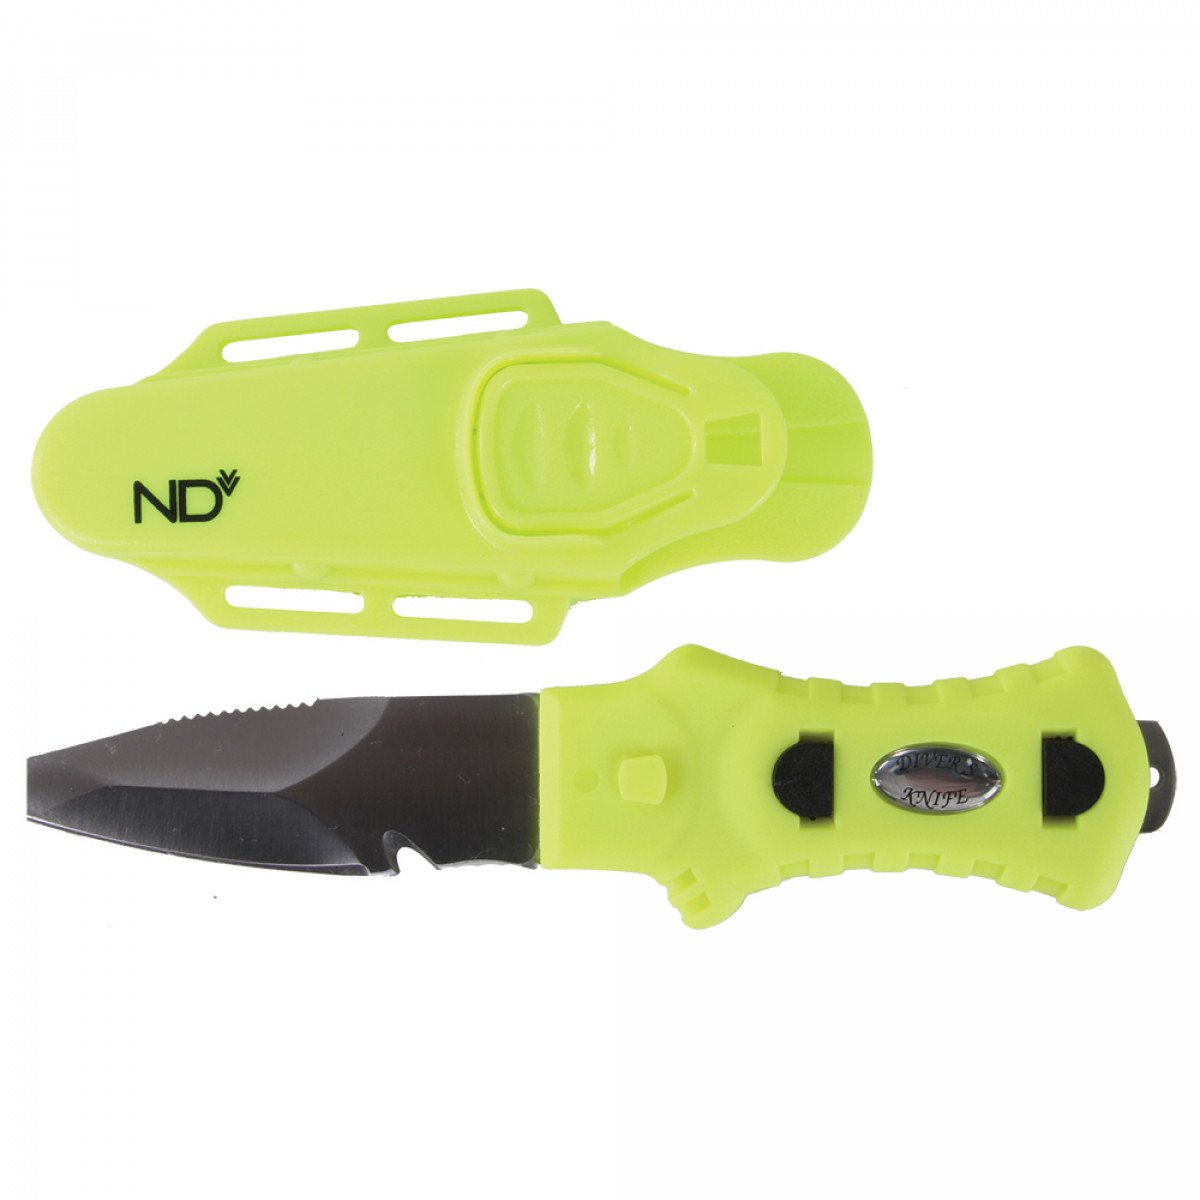 http://x-water.de/cdn/shop/products/northern-diver-rescue-knives-kn167-knife-03-1000x1000-OQwB.jpg?v=1629056777